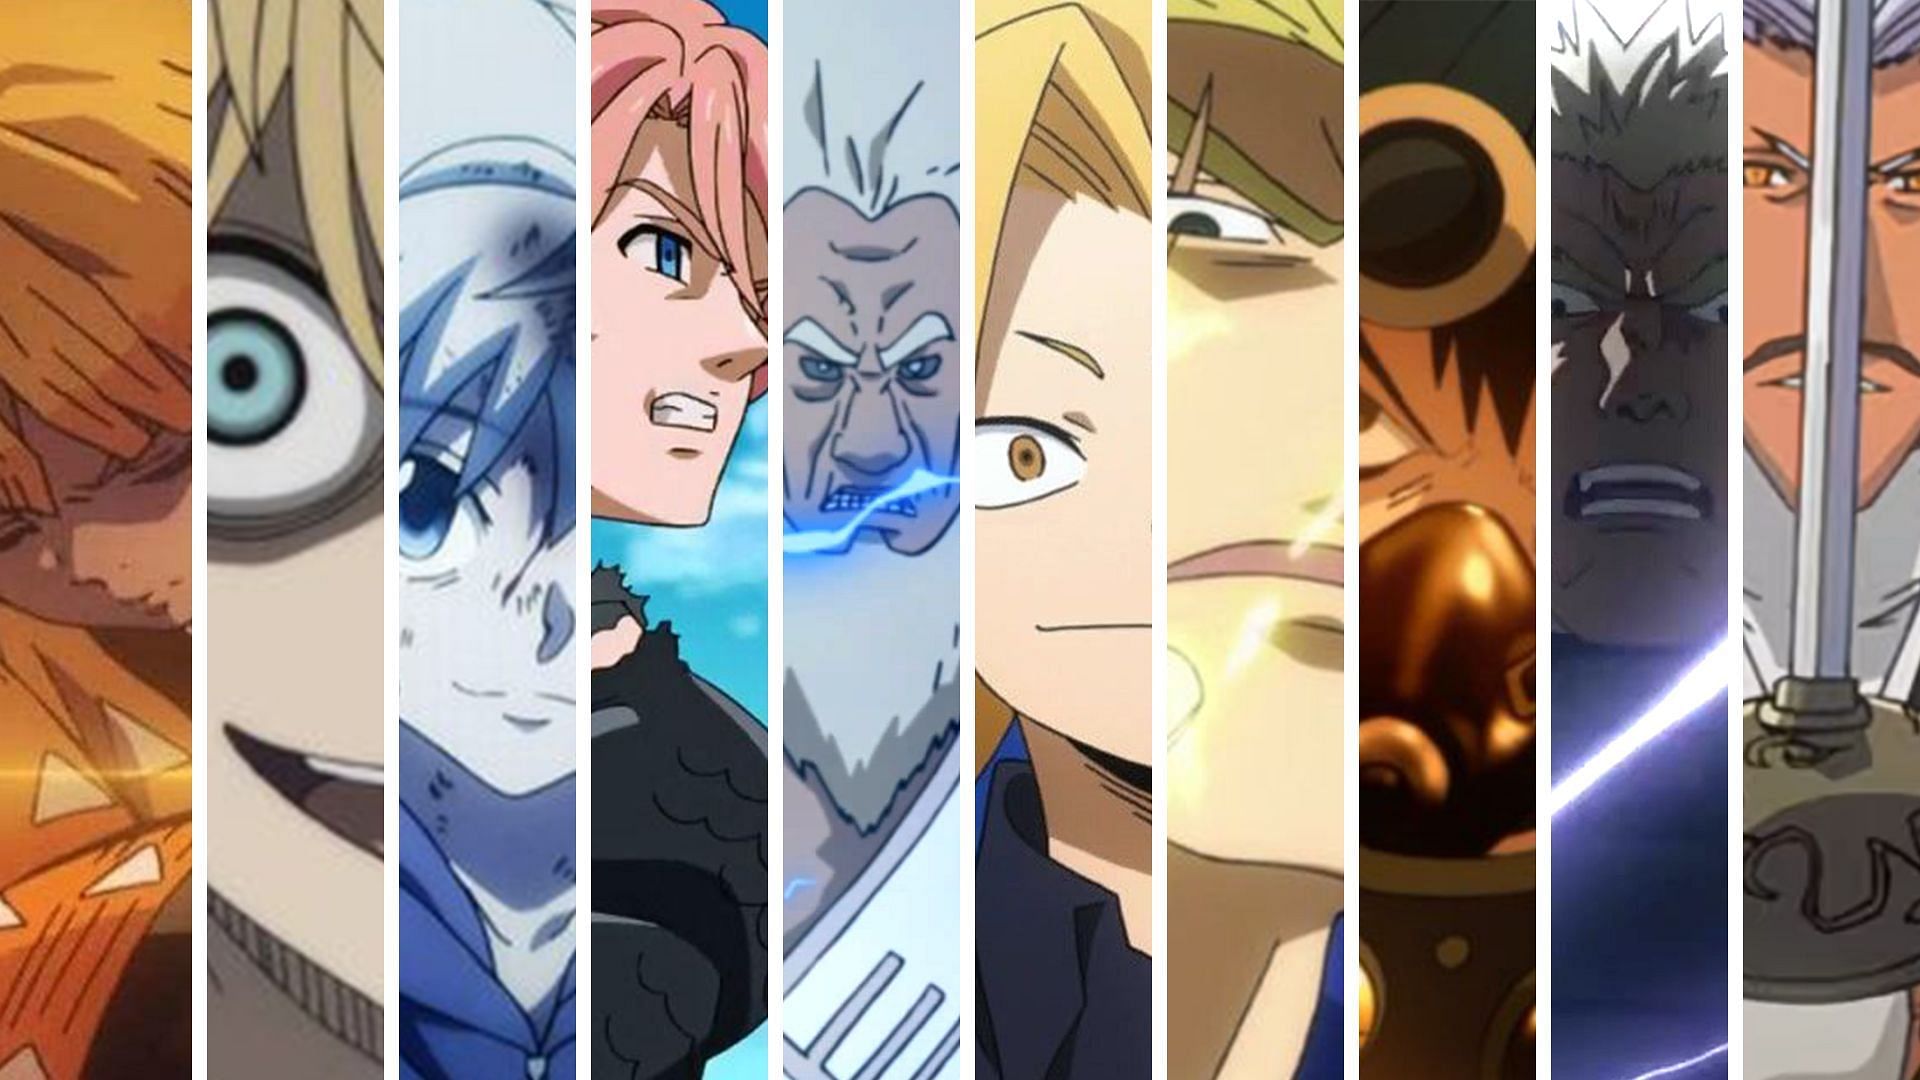 The 30 Most Powerful Anime Characters Ranked